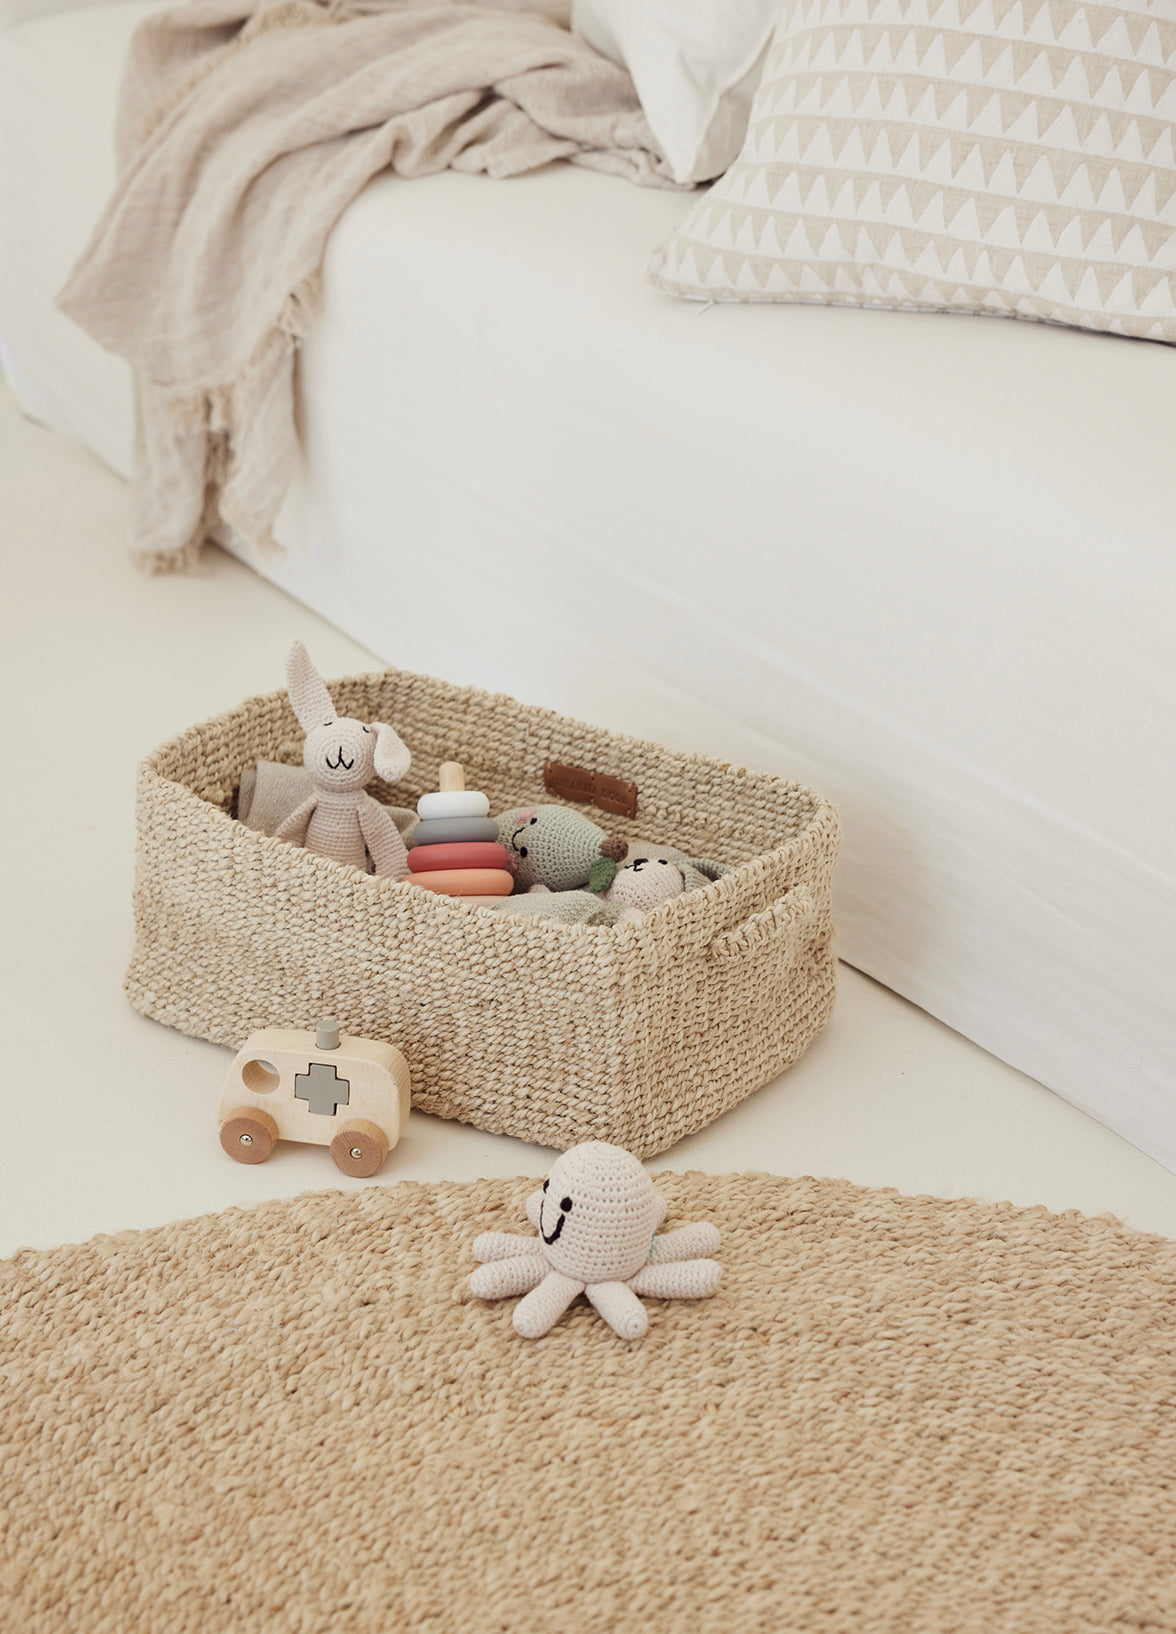 6 Charming Ways to Use Small Baskets - The Dharma Door Europe